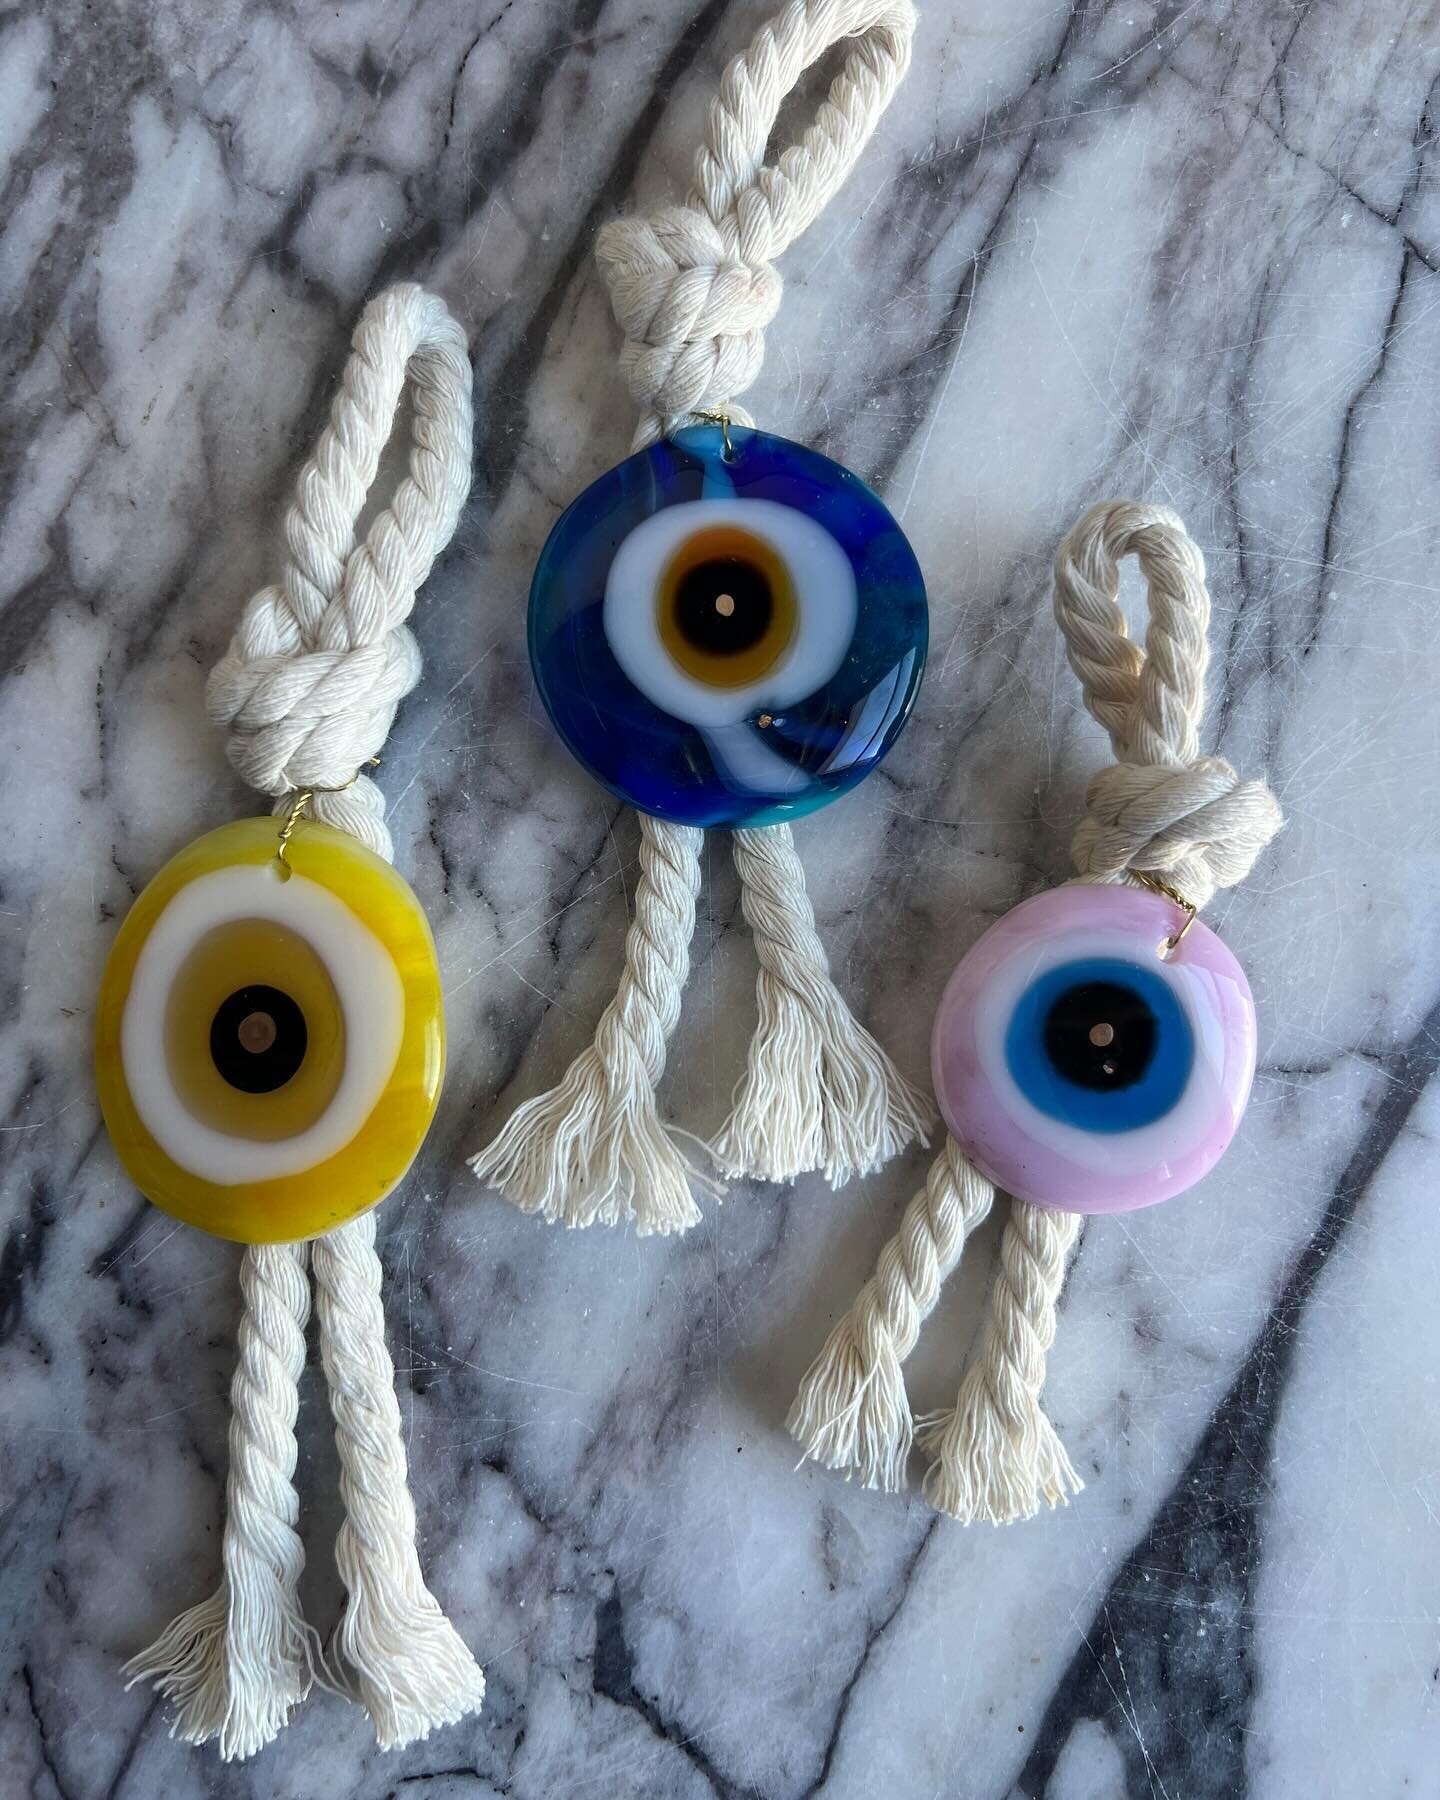 doing right with all new mati evil eyes for you, available when??? available where?!! See poll for details. And ➡️SWIPE➡️➡️to see the free Kalo Mina bracelet shipped with every order!! See you Sunday!